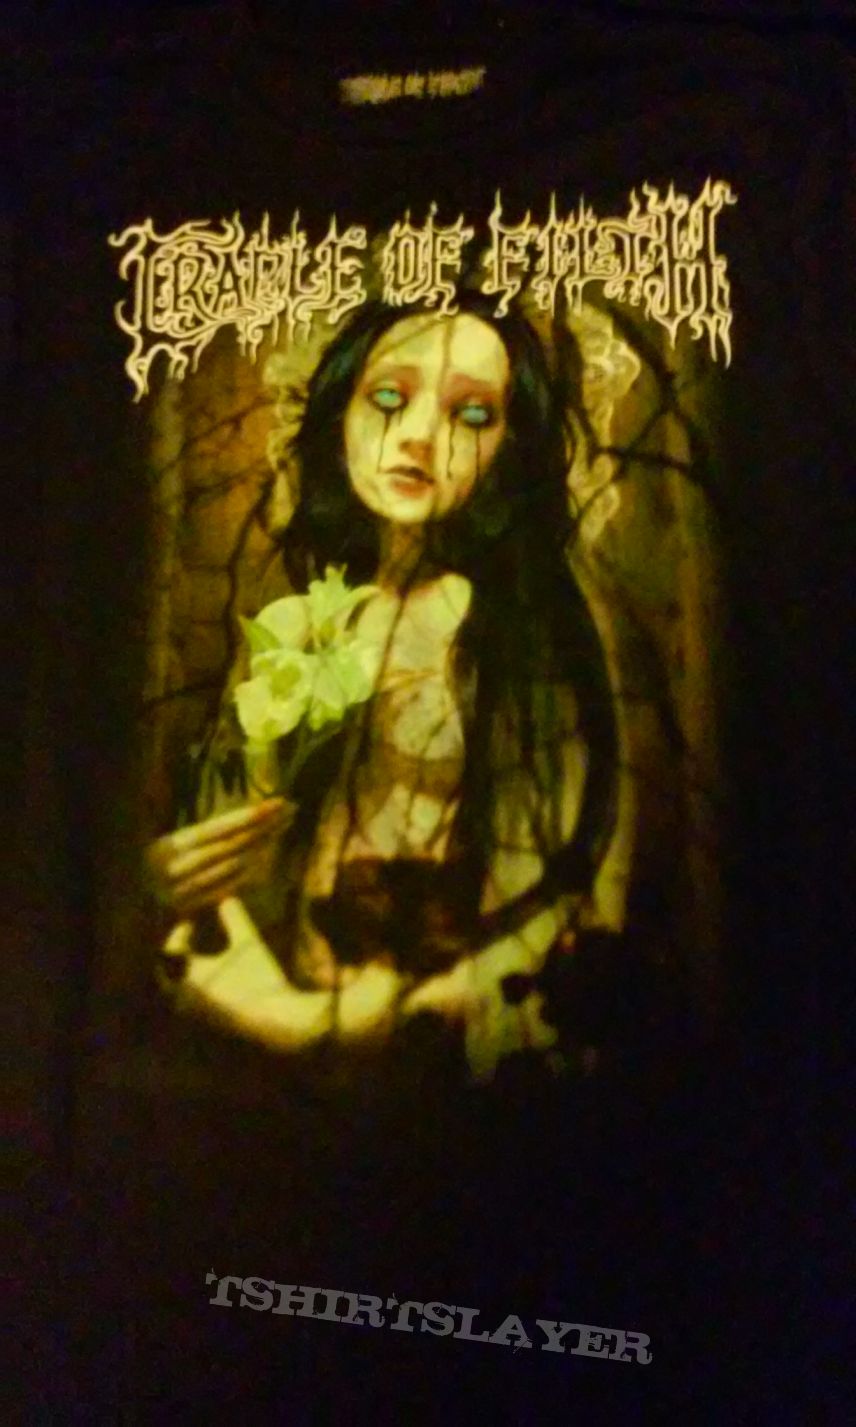 Cradle of Filth - (unknown name of design)